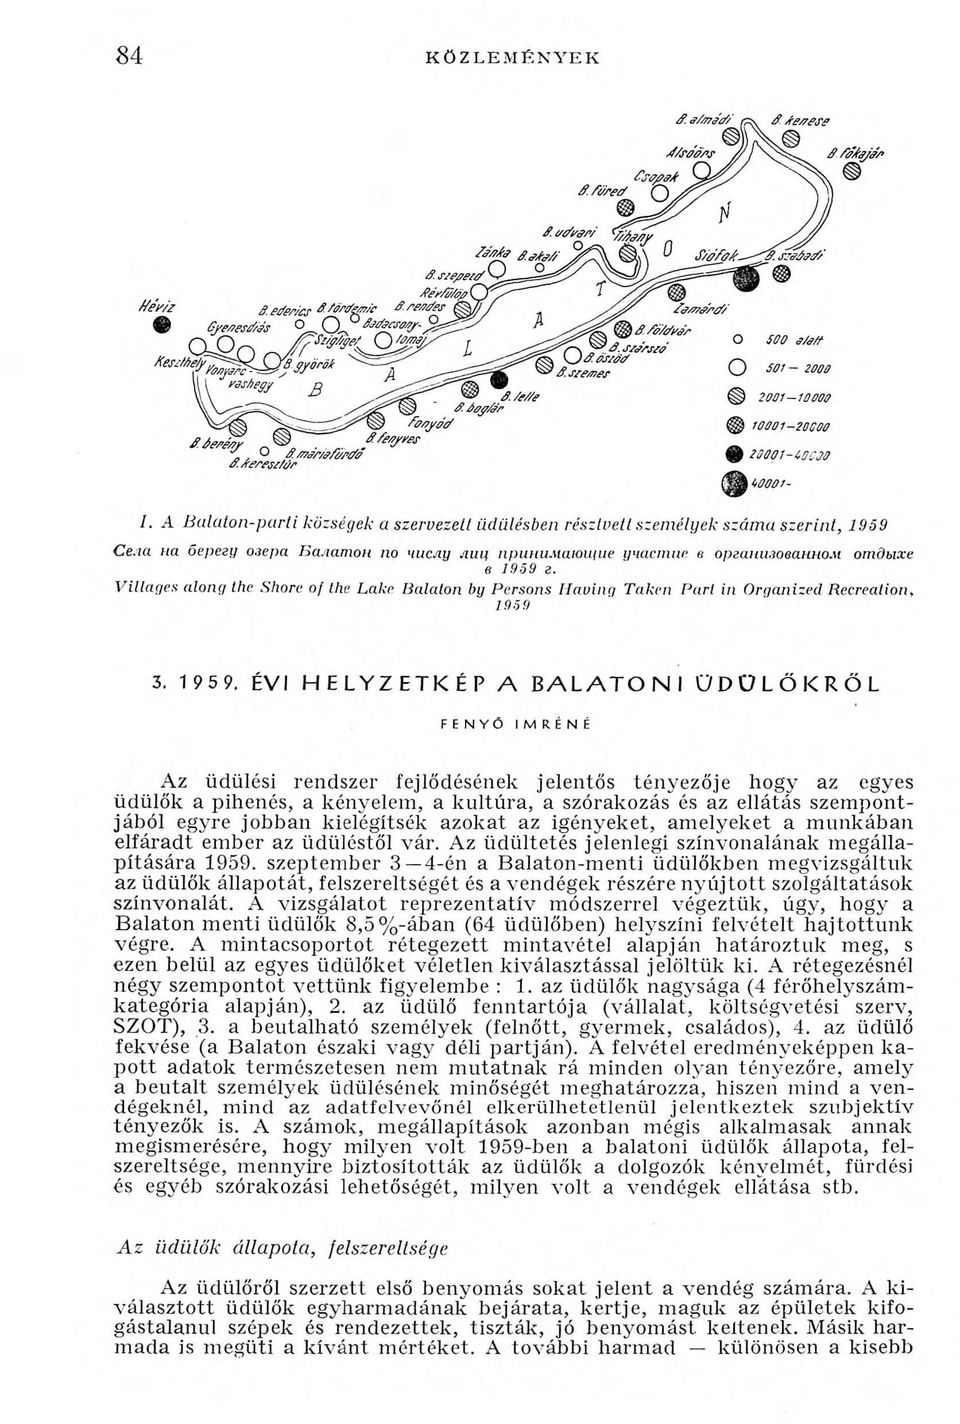 Villages along the Shore of the Lake Balaton by Persons Having Taken Part in Organized Recreationy 1959 3. 195 9.